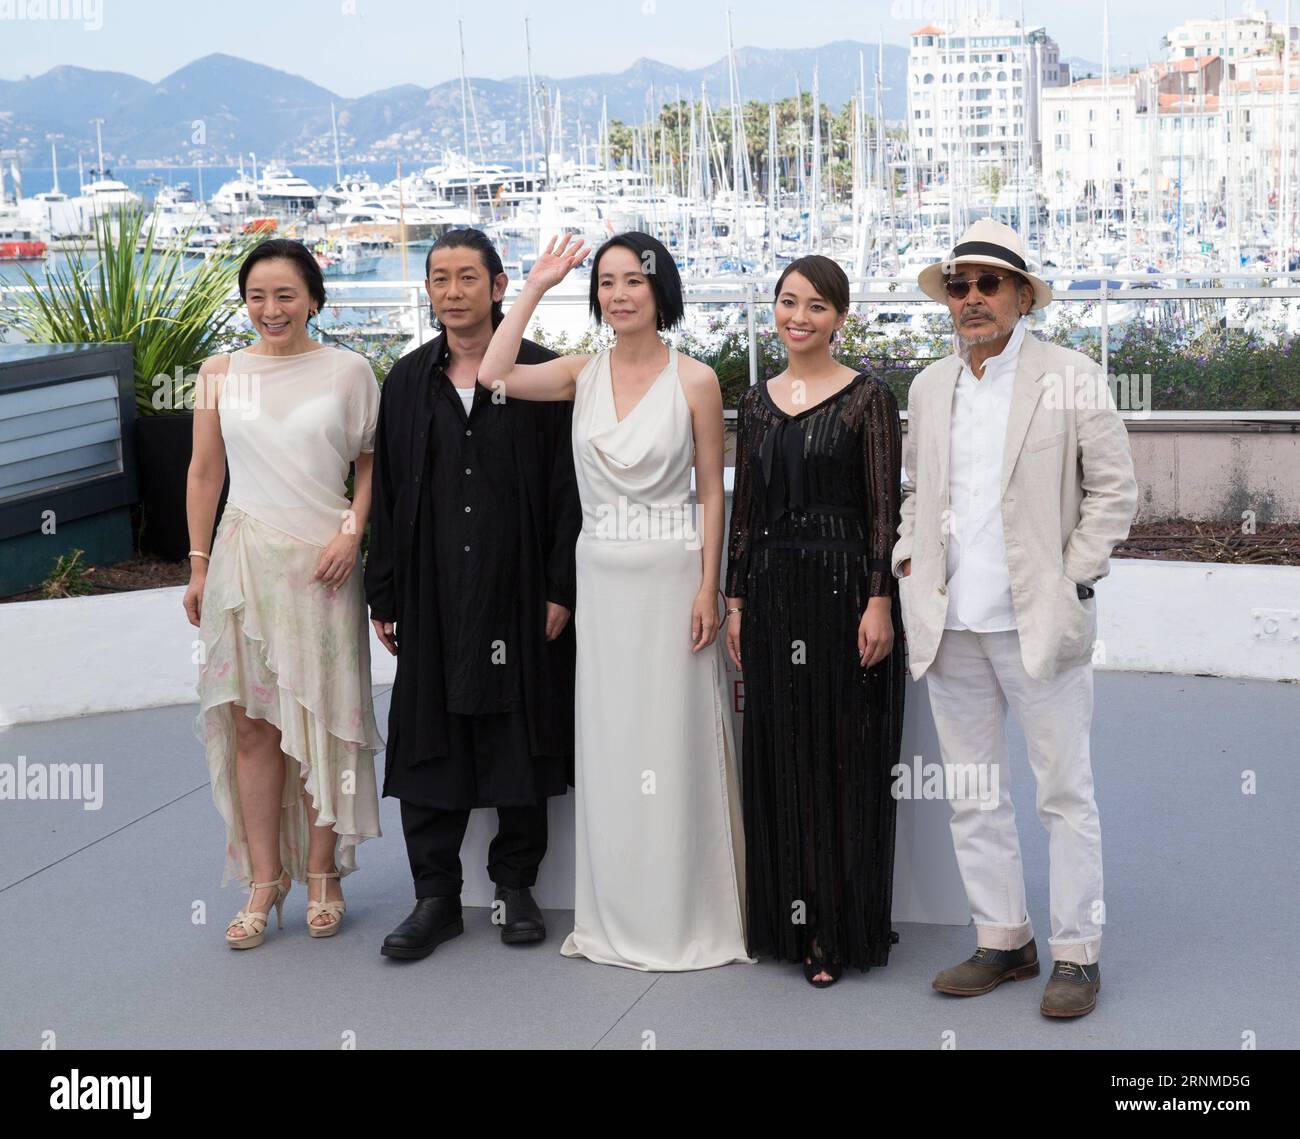 Bilder des Tages (170523) -- CANNES, May 23, 2017 -- Director Naomi Kawase, actor Masatoshi Nagase, actresses Misuzu Kanno and Ayame Misaki and actor Tatsuya Fuji (L-R) pose for a photocall of the film Hikari (Radiance) during the 70th Cannes Film Festival at Palais des Festivals in Cannes, France, on May 23, 2017. ) (dtf) FRANCE-CANNES-70TH CANNES FILM FESTIVAL-HIKARI XuxJinquan PUBLICATIONxNOTxINxCHN   Images the Day  Cannes May 23 2017 Director Naomi Kawase Actor Masatoshi NAGASE actresses  Kanno and Ayame Misaki and Actor Tatsuya Fuji l r Pose for a photo call of The Film Hikari Radiance d Stock Photo